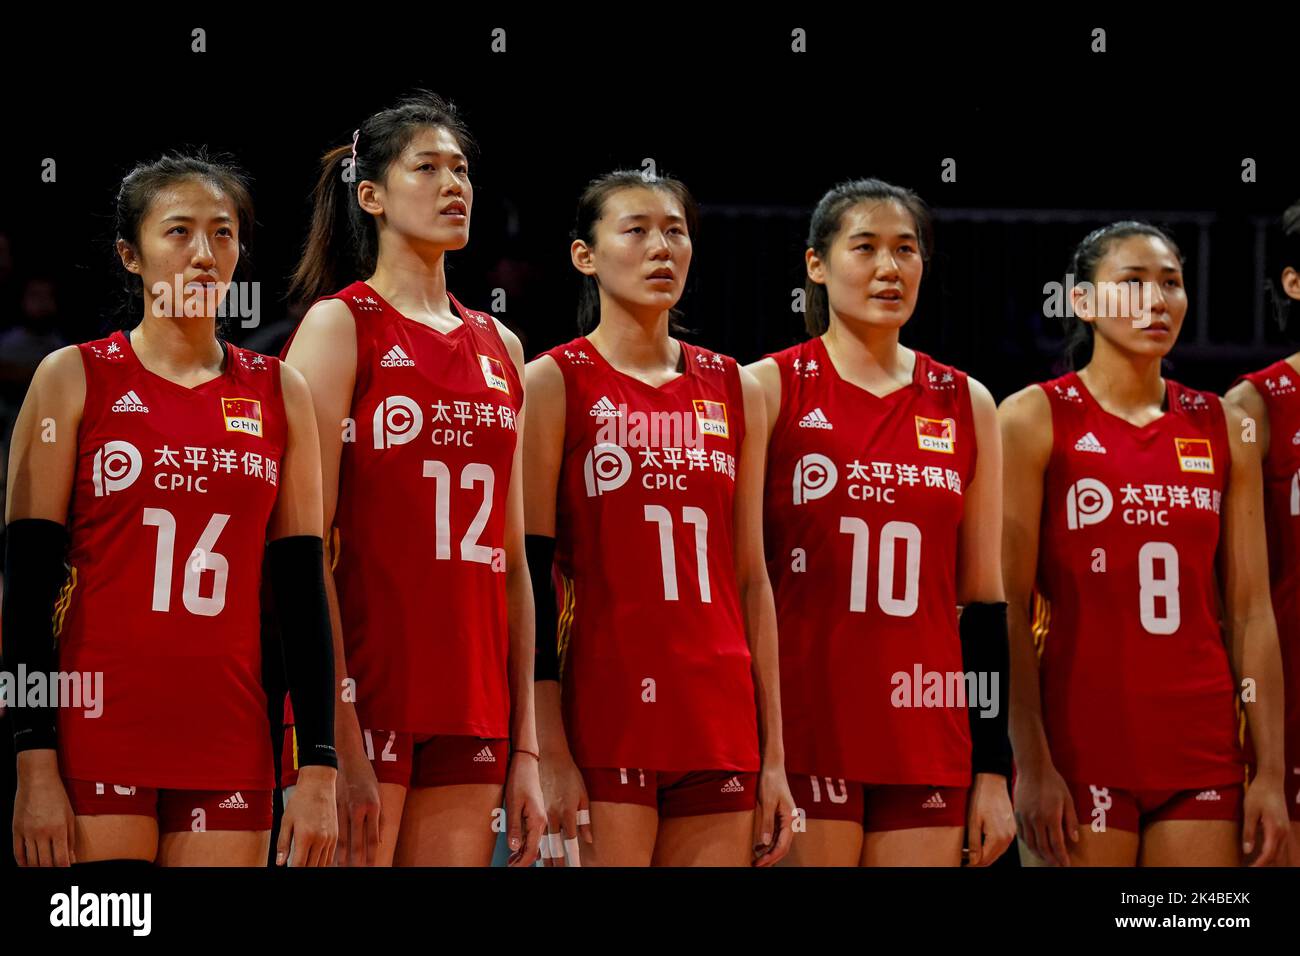 ARNHEM, NETHERLANDS - SEPTEMBER 25: Xia Ding of China, Yingying Li of China, Yizhu Wang of China, Yunlu Wang of China and Ye Jin of China line up for the national anthem during the Pool D Phase 1 match between China and Argentina on Day 3 of the FIVB Volleyball Womens World Championship 2022 at the Gelredome on September 25, 2022 in Arnhem, Netherlands (Photo by Rene Nijhuis/Orange Pictures) Stock Photo